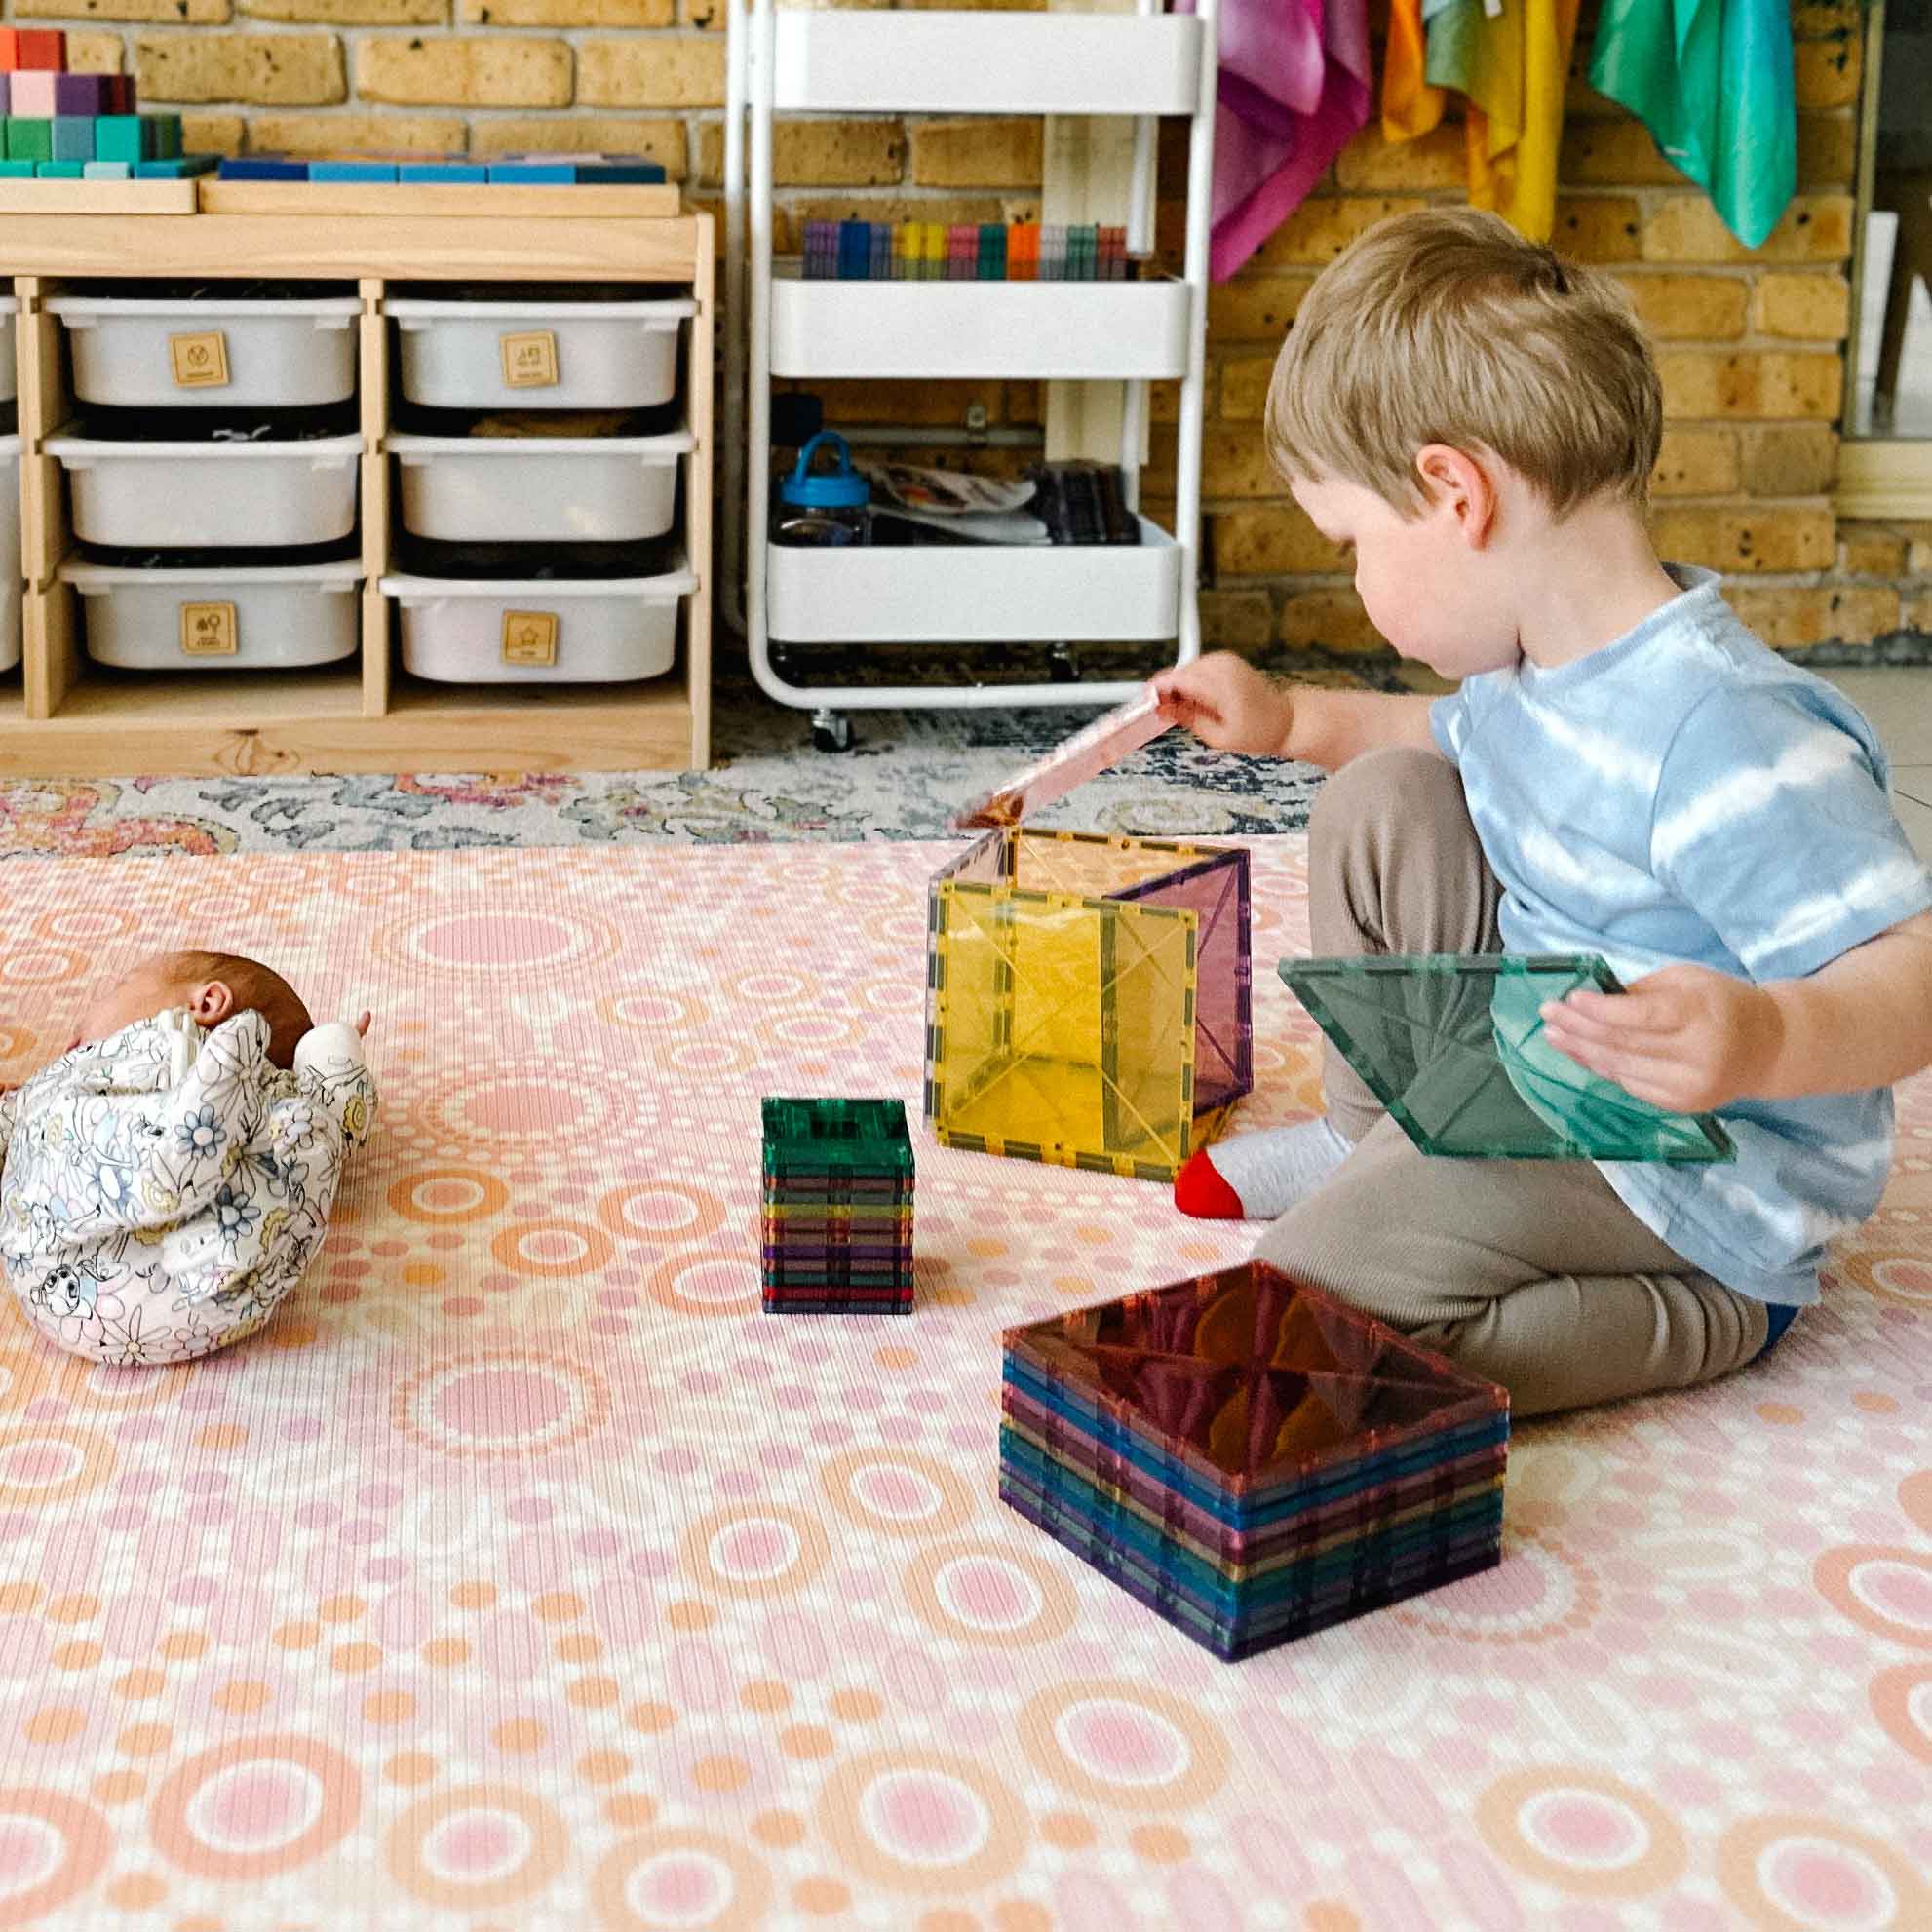 magnetic tiles on a play mat